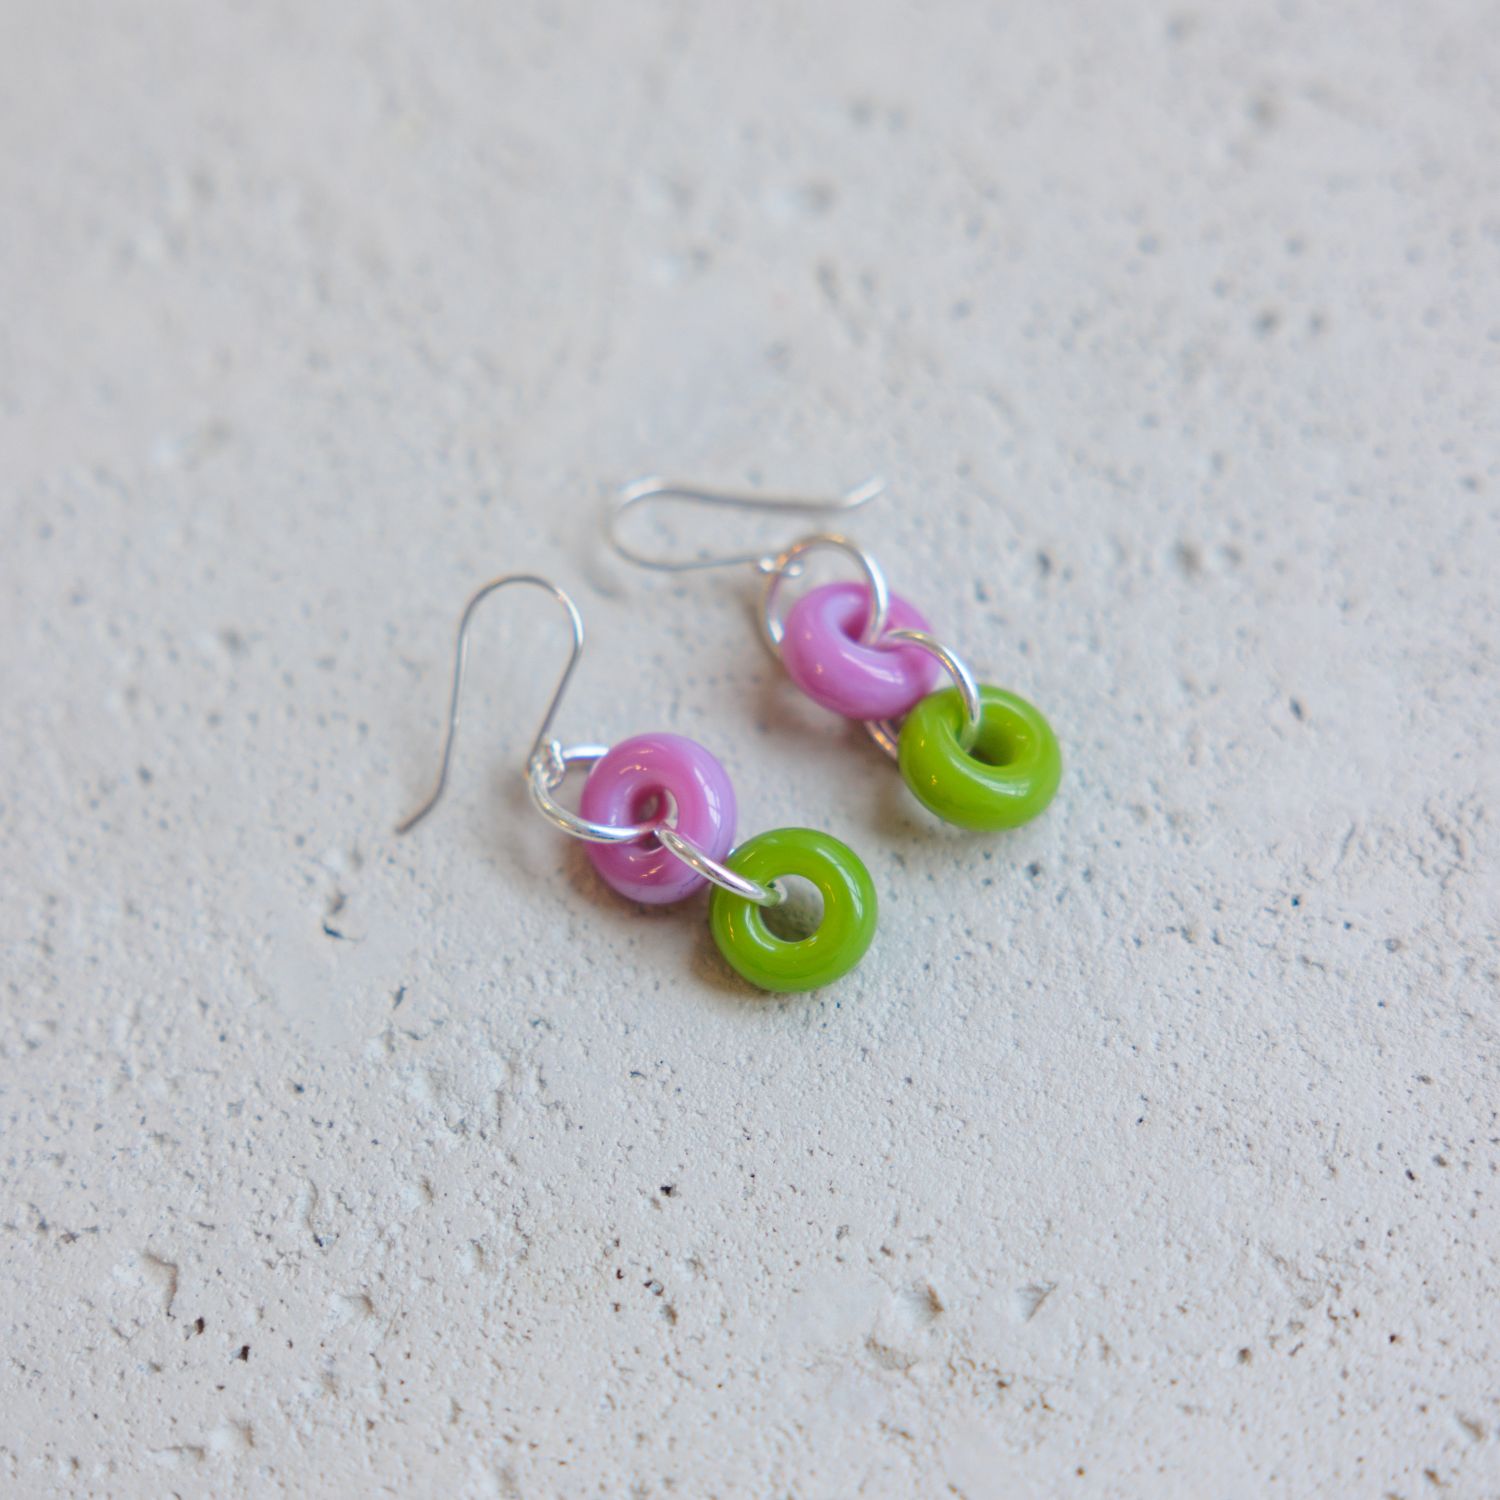 Jill Cribbin: Cheerie-oh Earrings in Pink and Green Product Image 2 of 2